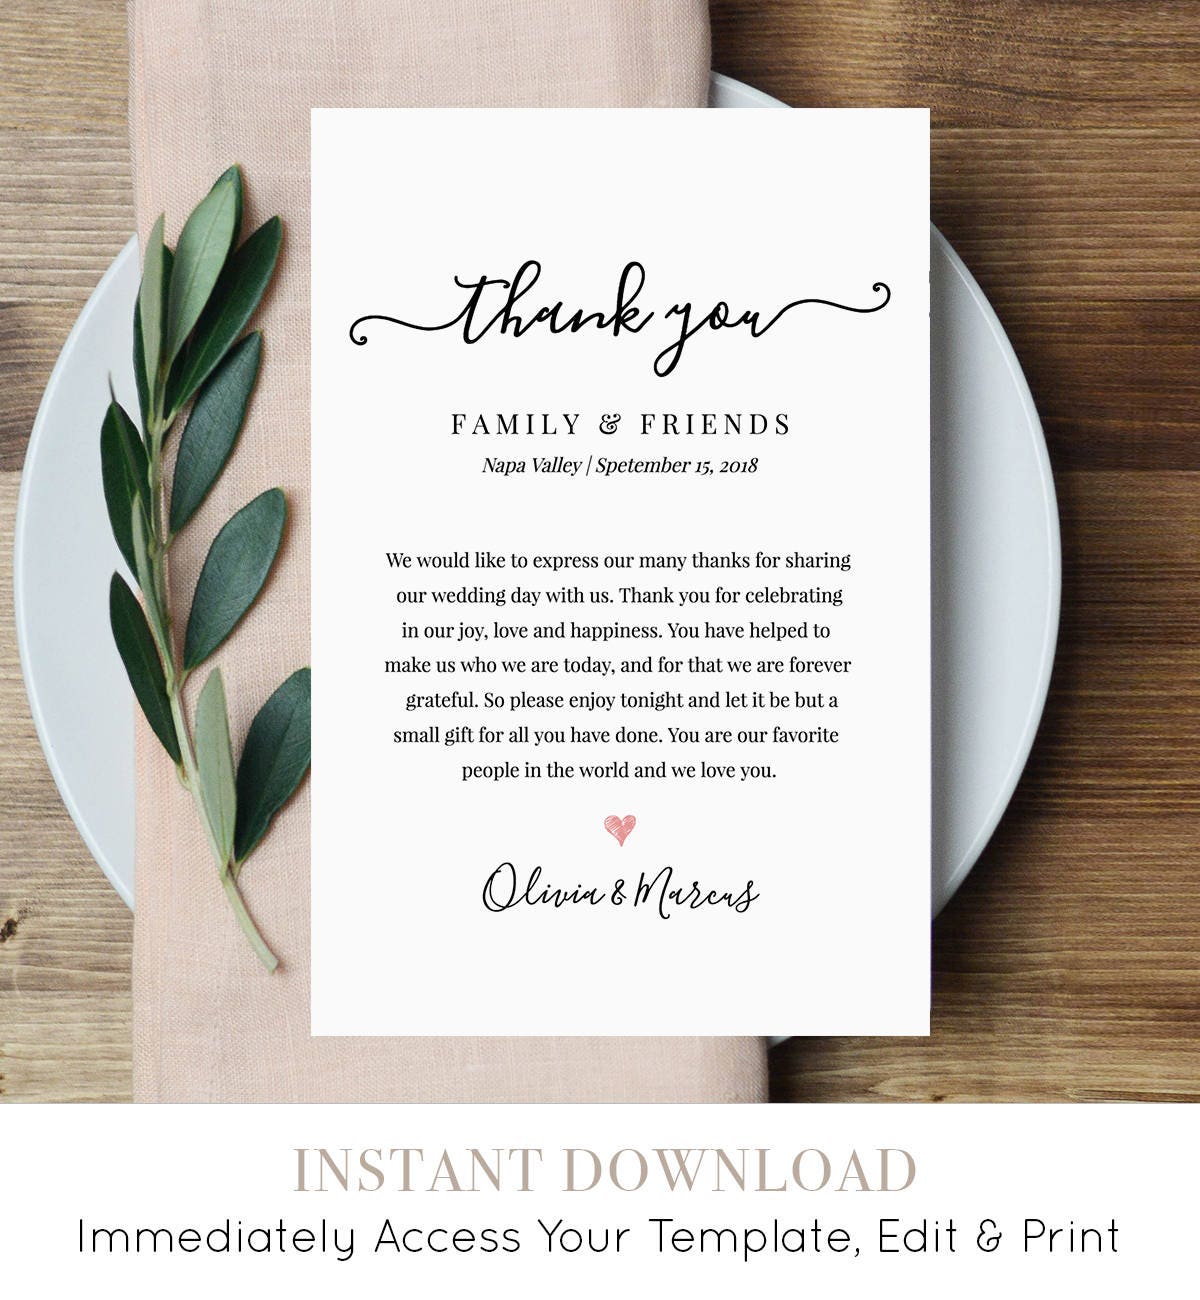 Wedding Thank You Letter, Thank You Note, Printable Wedding In Lieu of ...